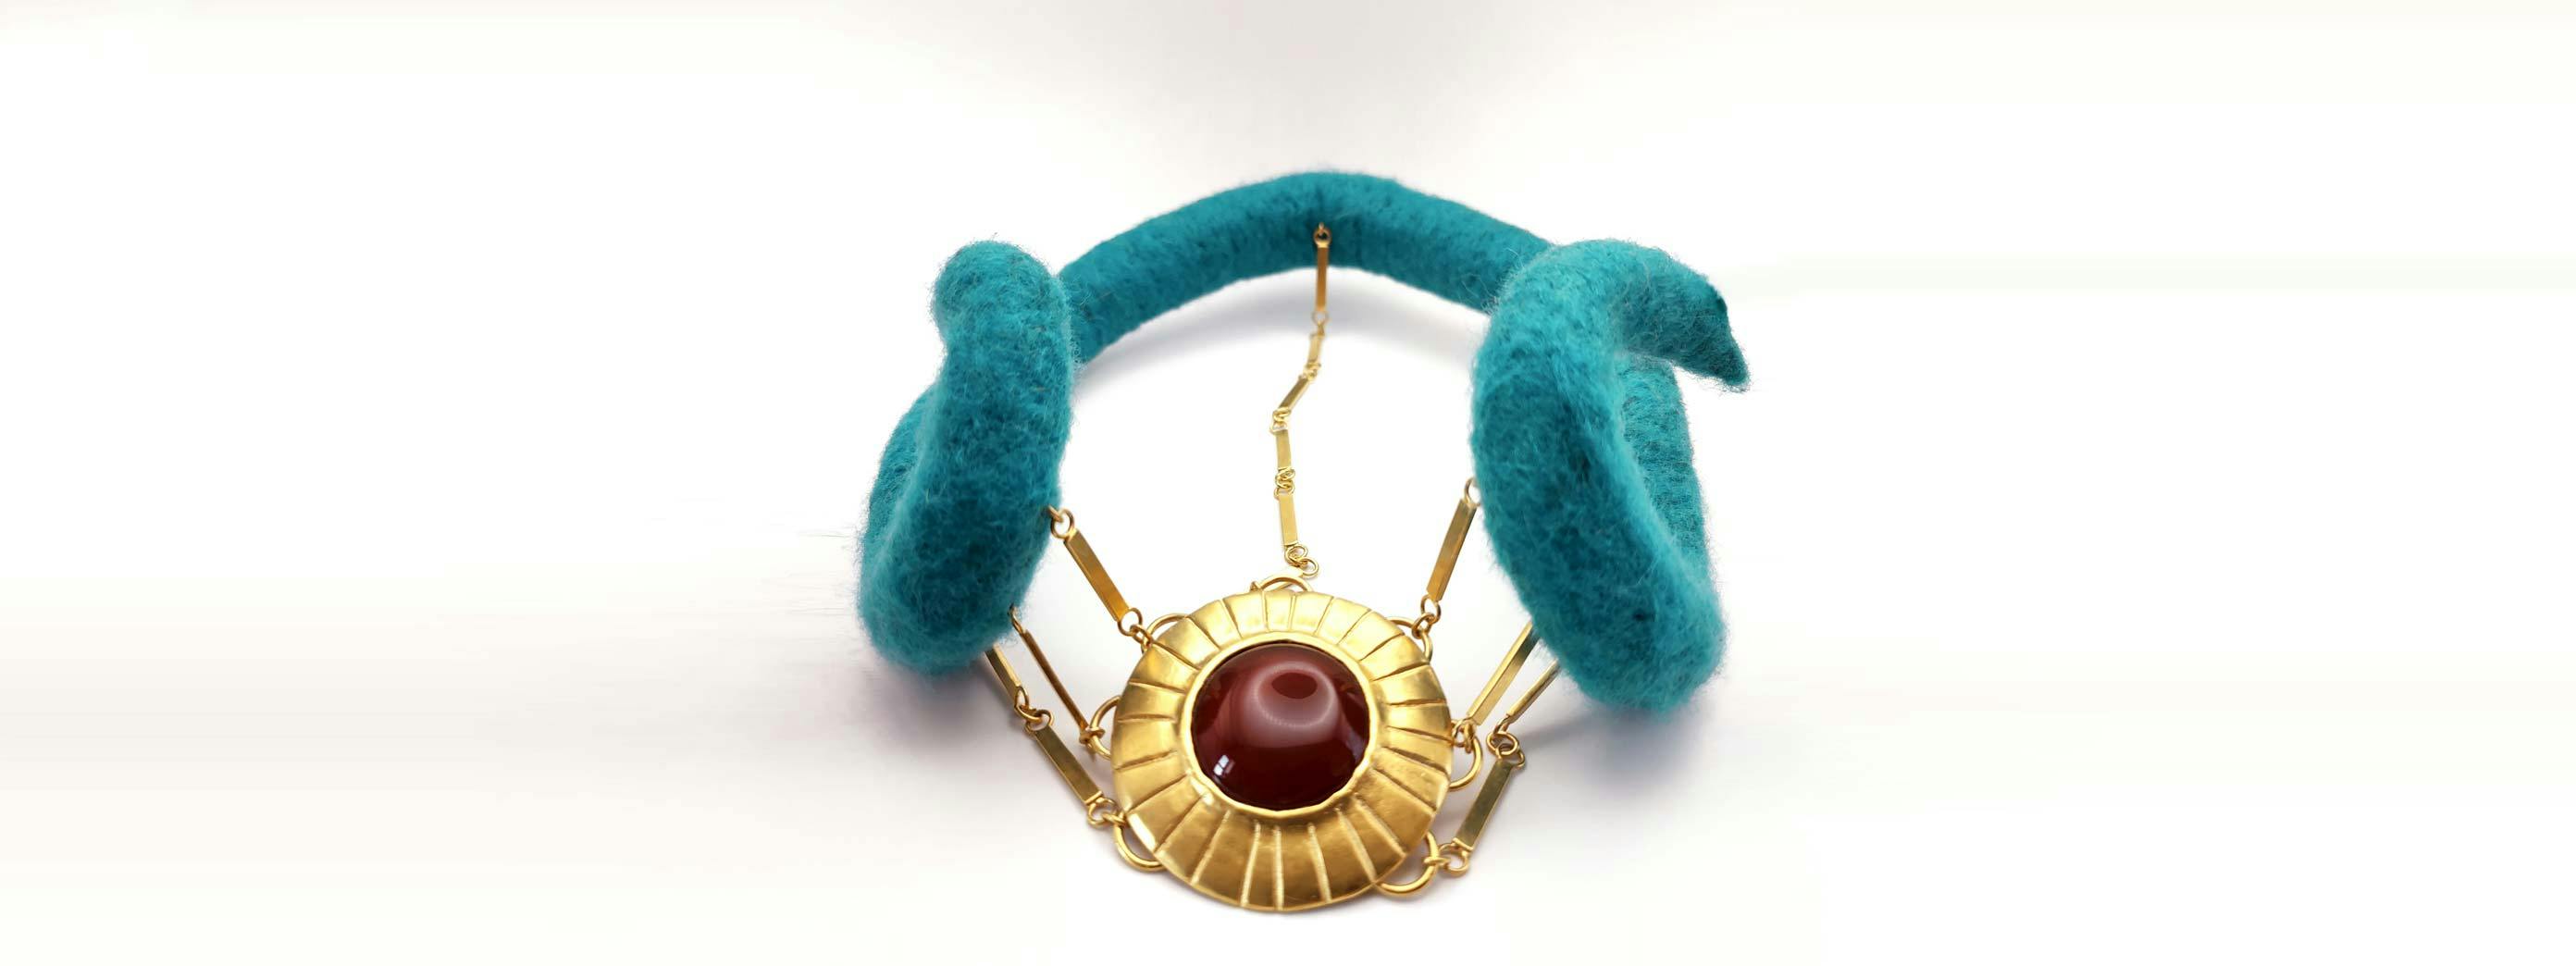 Jewellery and objects headpiece